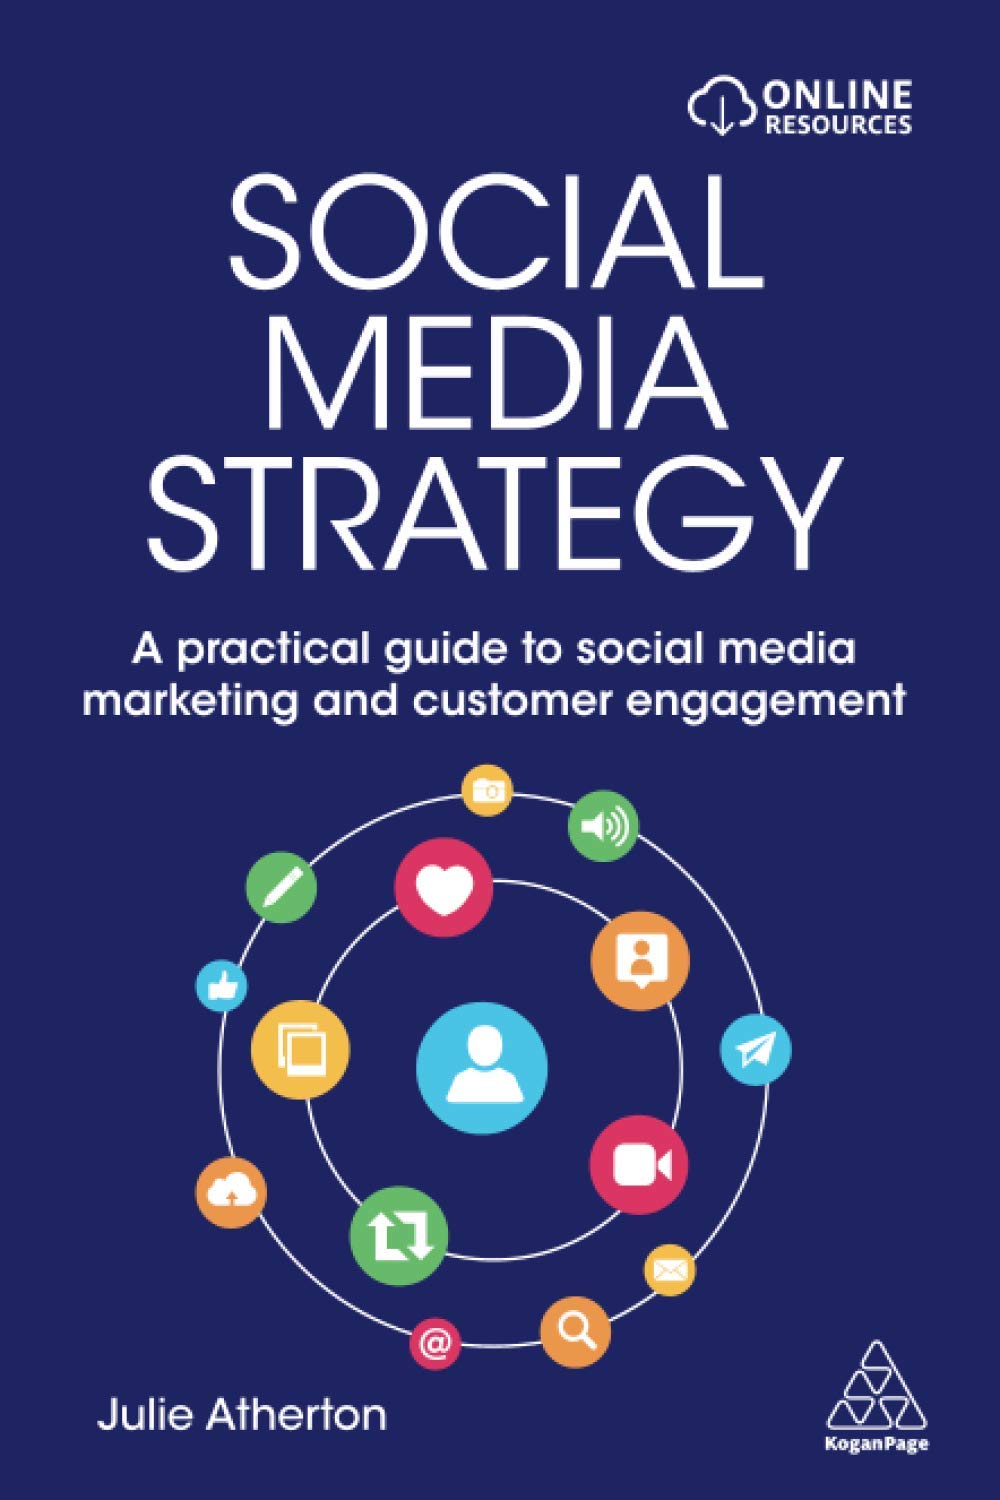 Social Media Strategy: A Practical Guide to Social Media